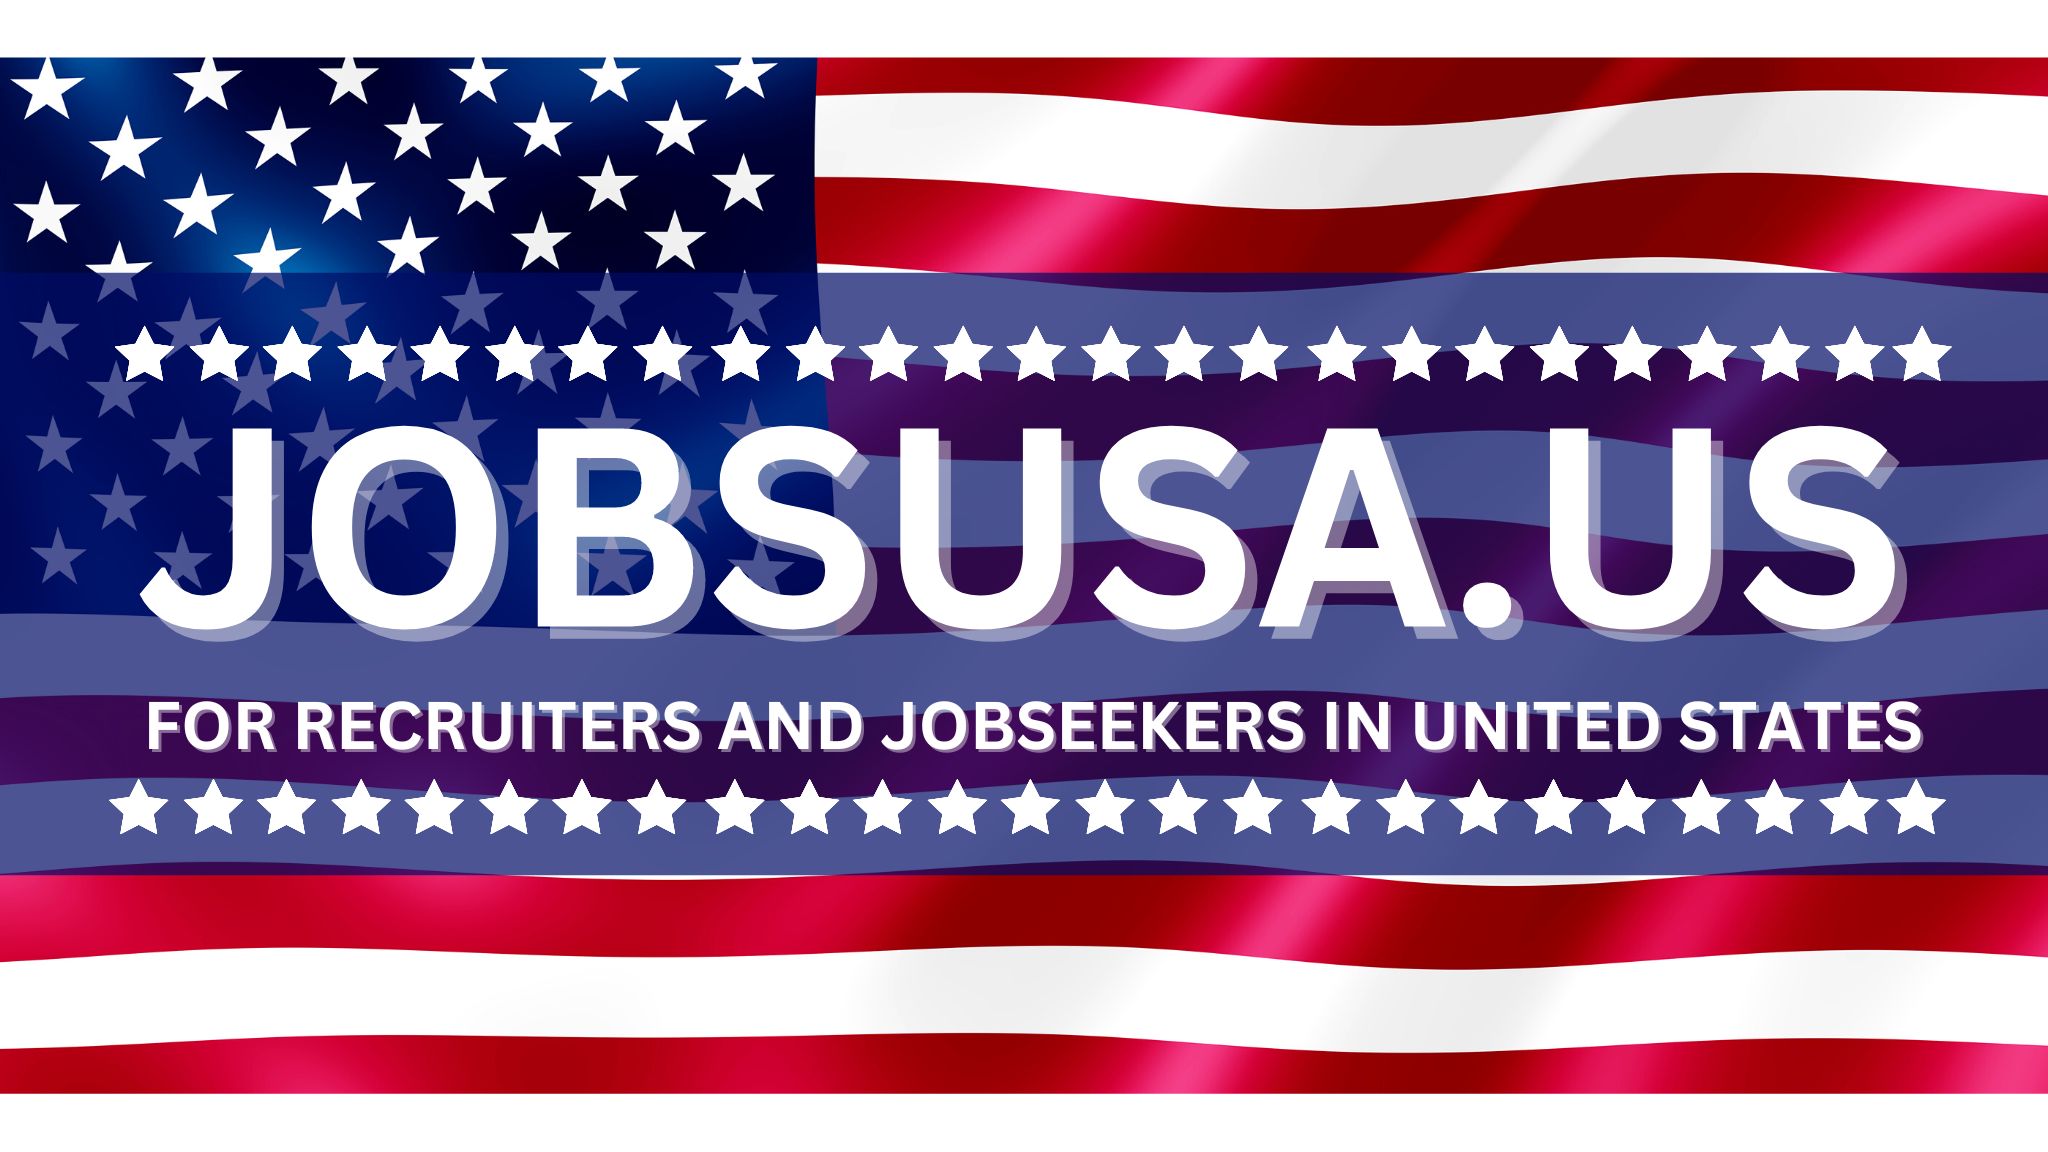 jobs-usa-website-and-apps-for-recrutiers-candidates-in-united-states-of-america